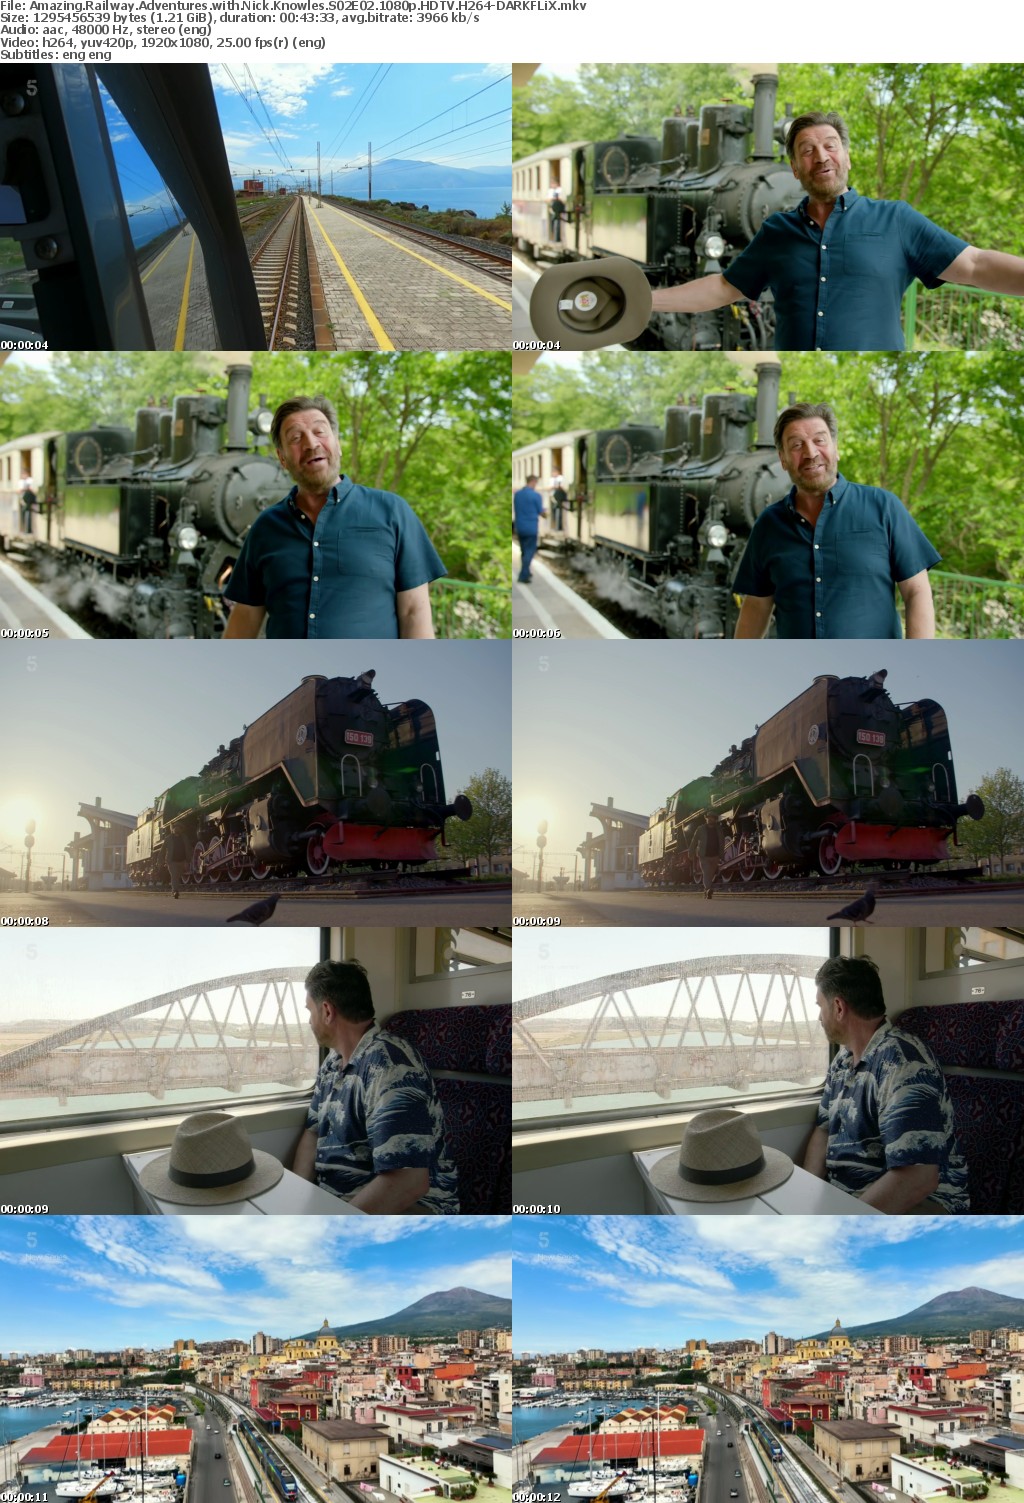 Amazing Railway Adventures with Nick Knowles S02E02 1080p HDTV H264-DARKFLiX